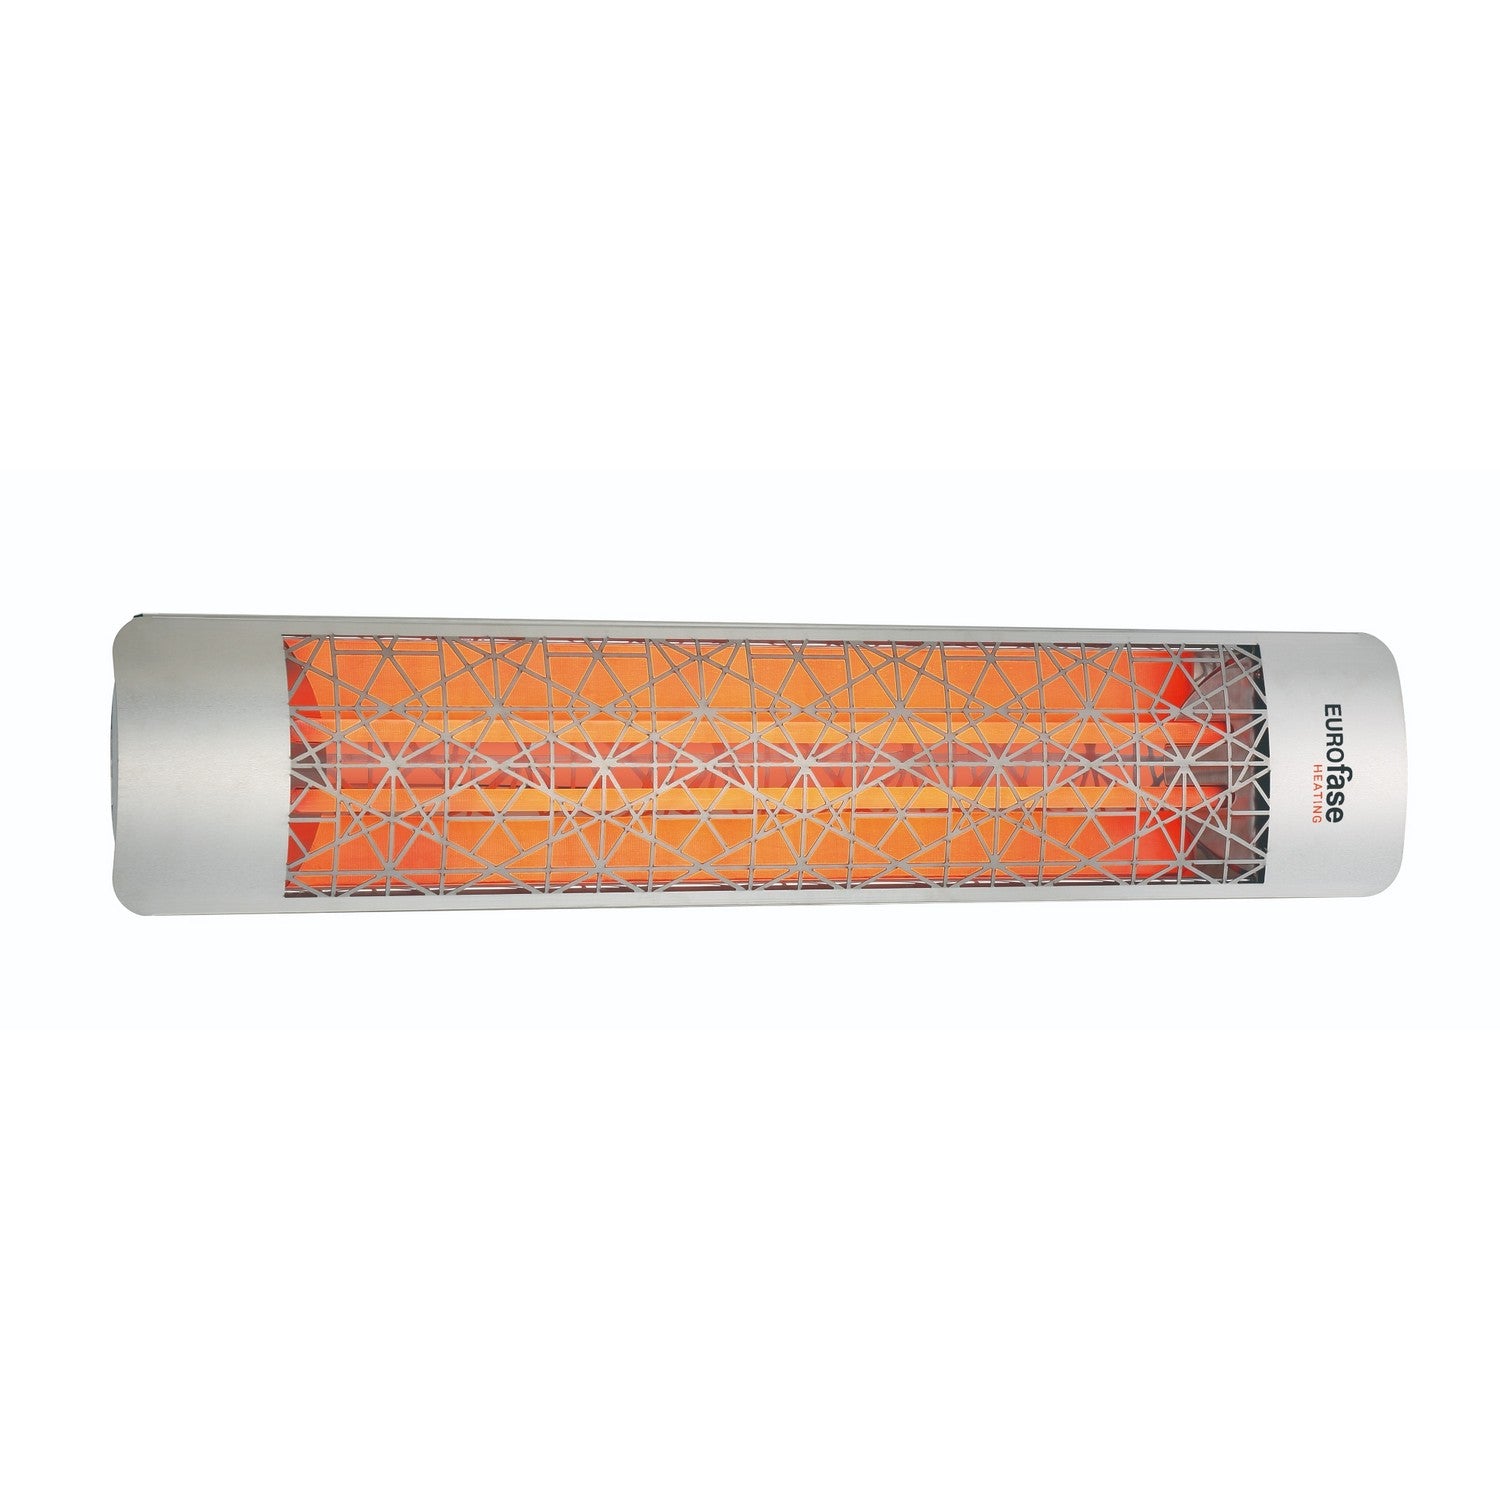 Eurofase - EF50480S4 - Electric Heater - Stainless Steel